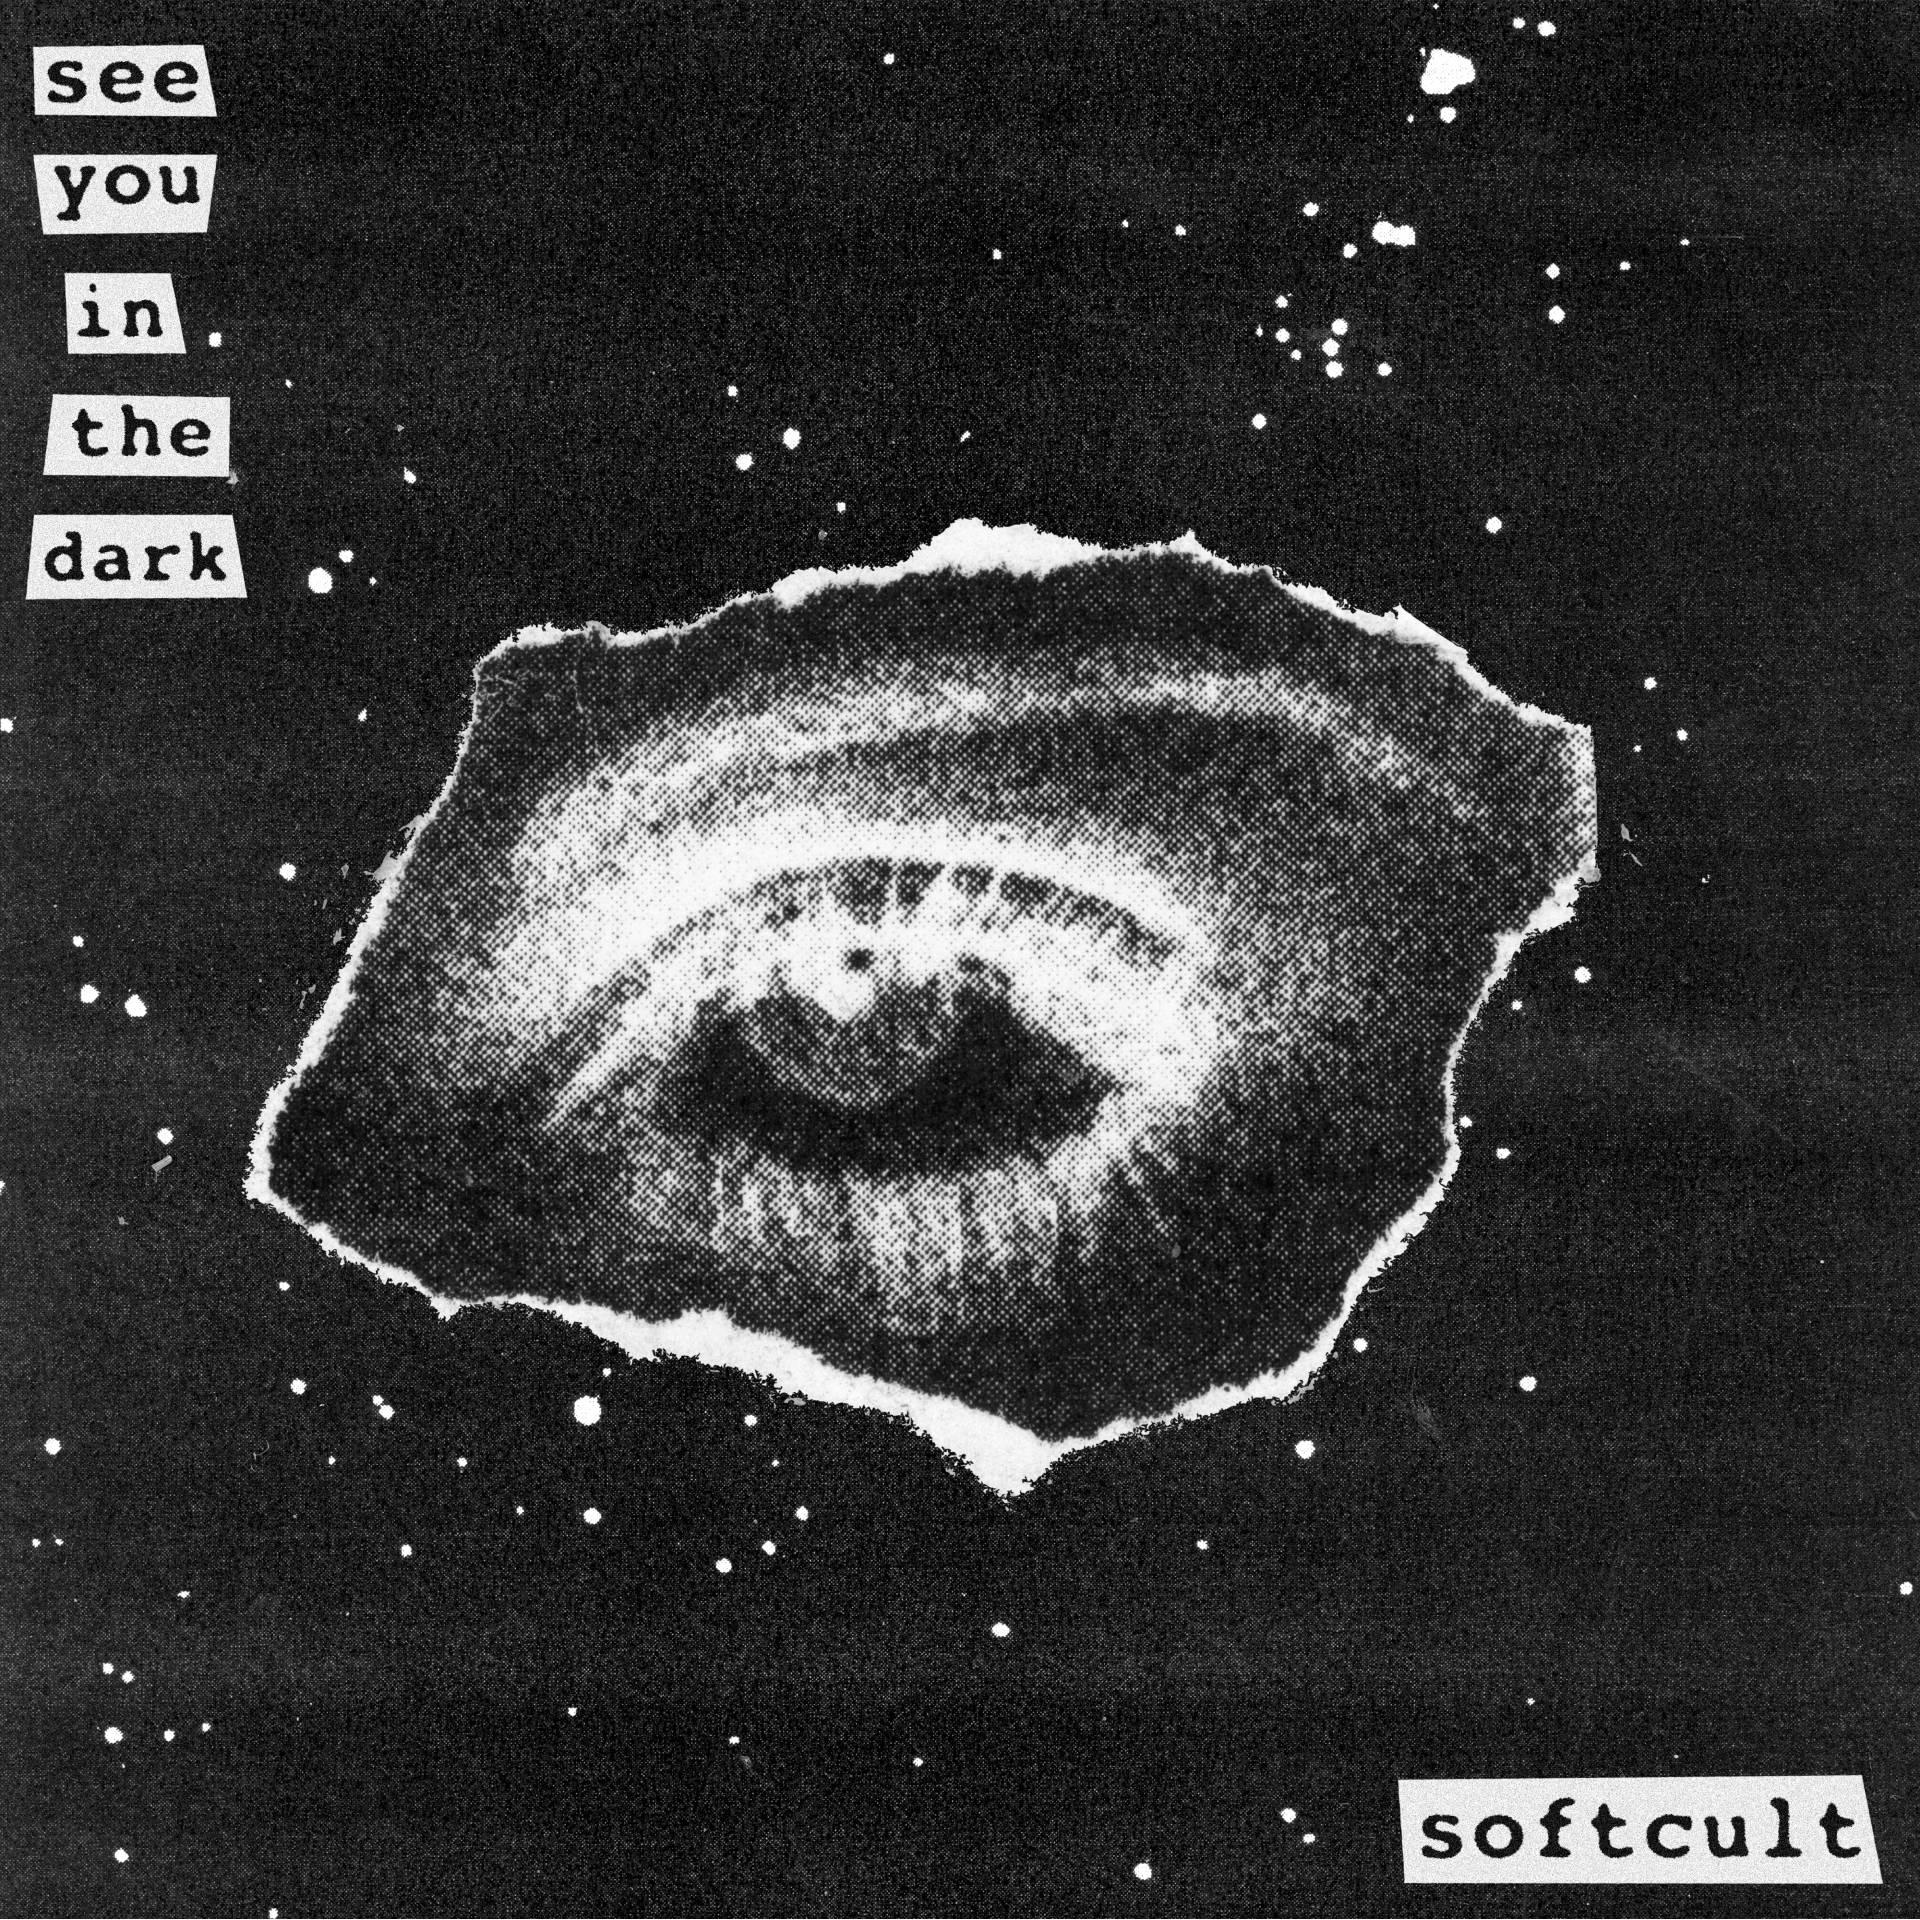 Softcult ‘See You in the Dark’ EP album artwork